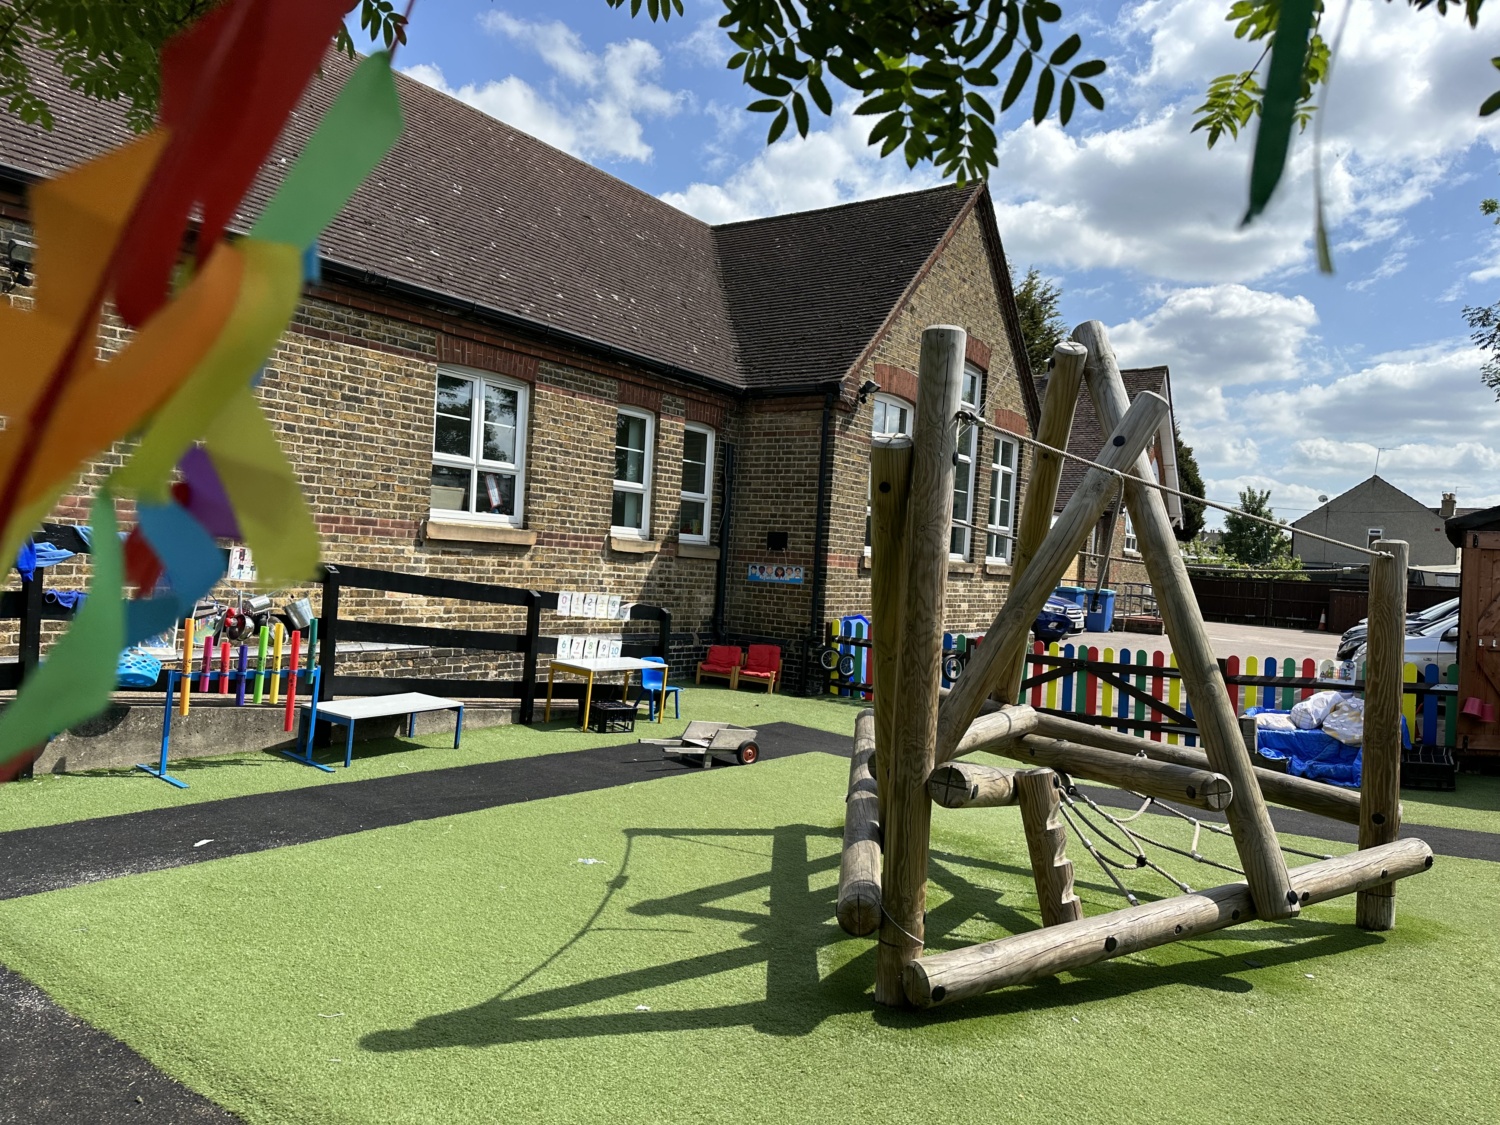 An image of the outdoor play area, with benches and a climbing frame